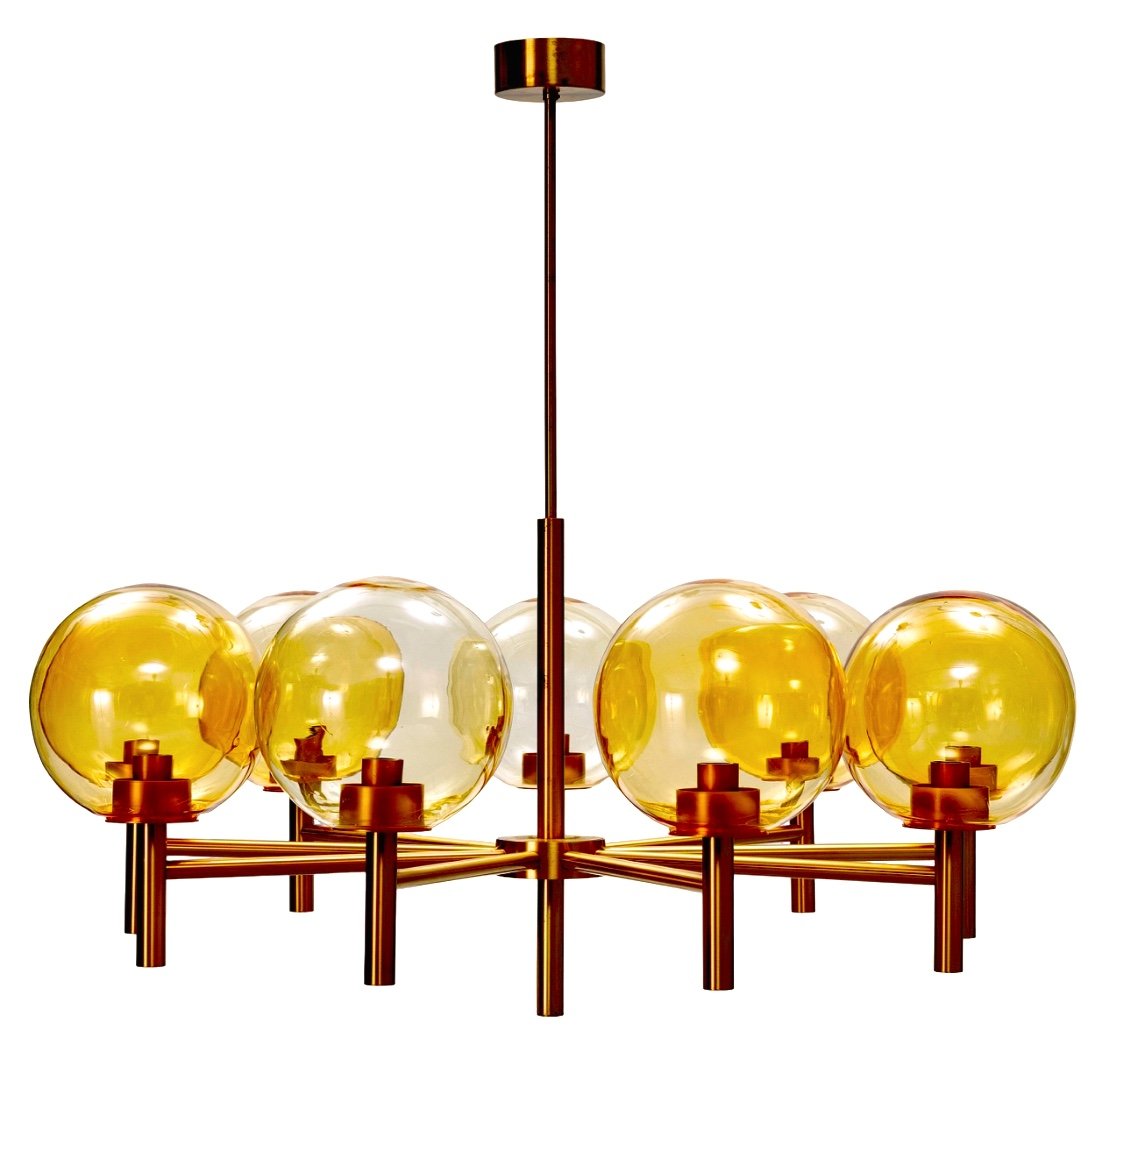 Large Luxus Chandelier With 9 Lights In Golden Brass And Amber Glass Globes, Sweden 1970s/80s-photo-5